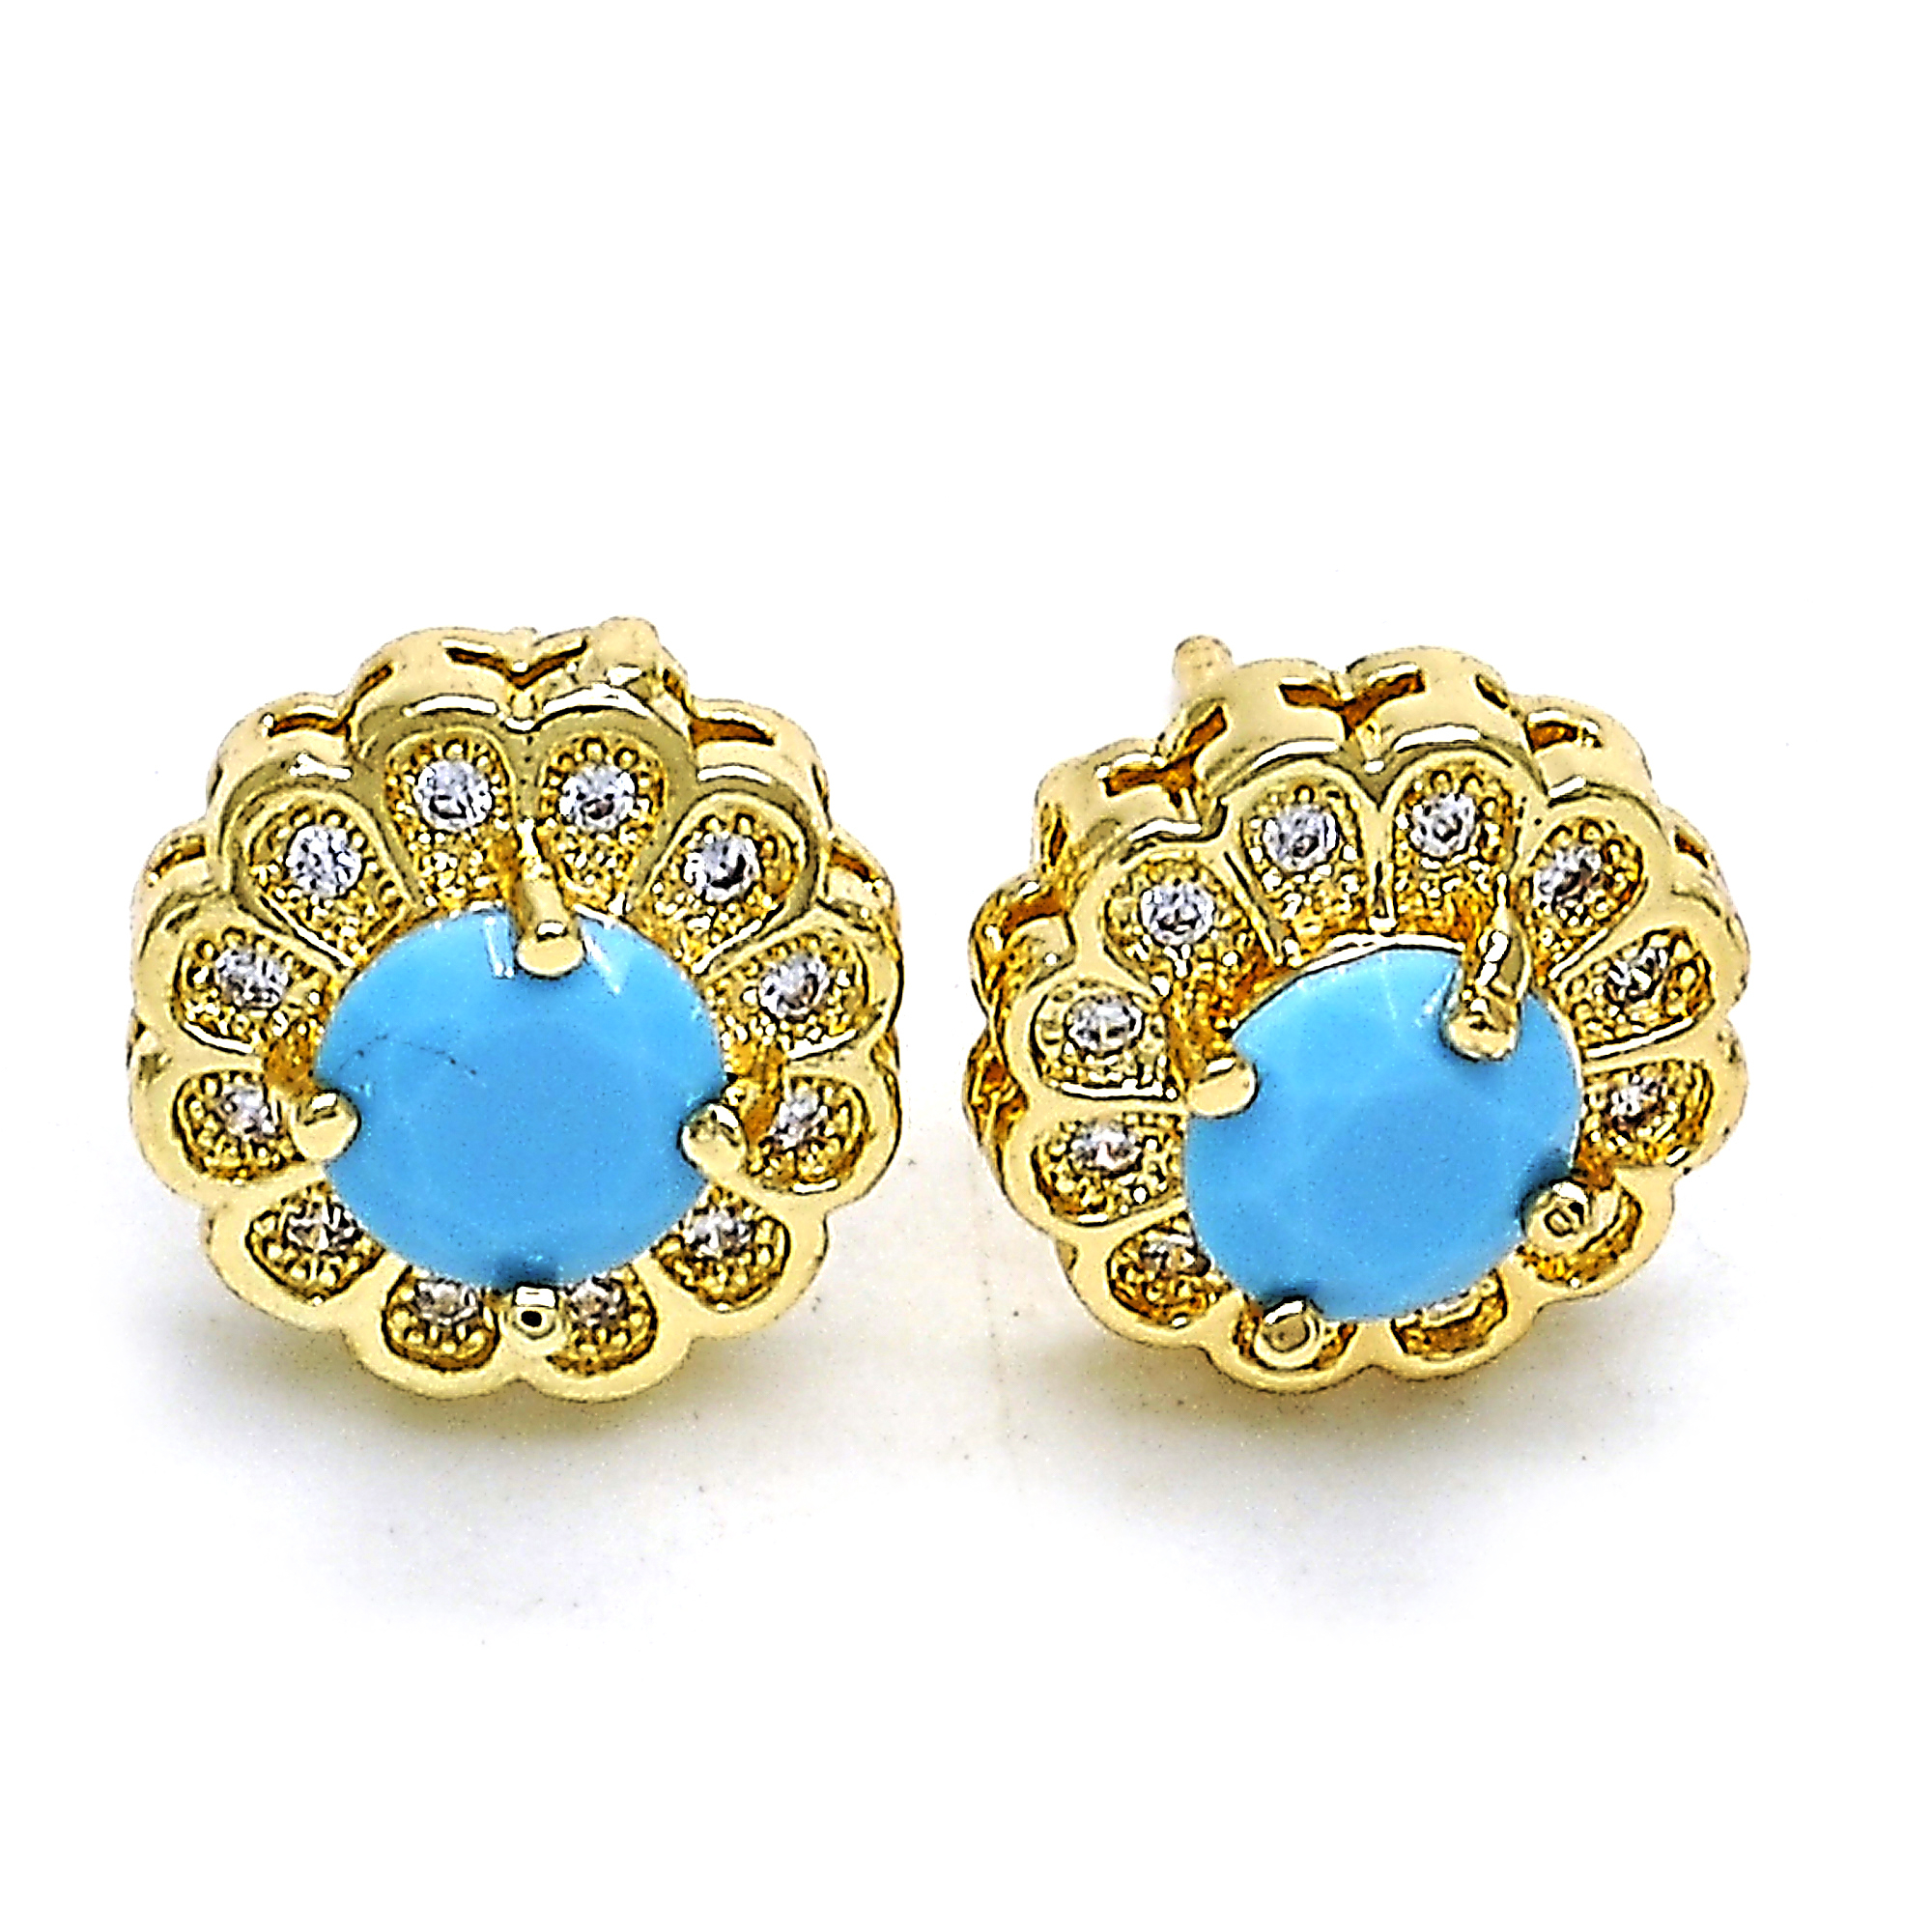 14K Gold Filled High Polish Finsh Turquoise Flower Stud Earring With Micro Pave